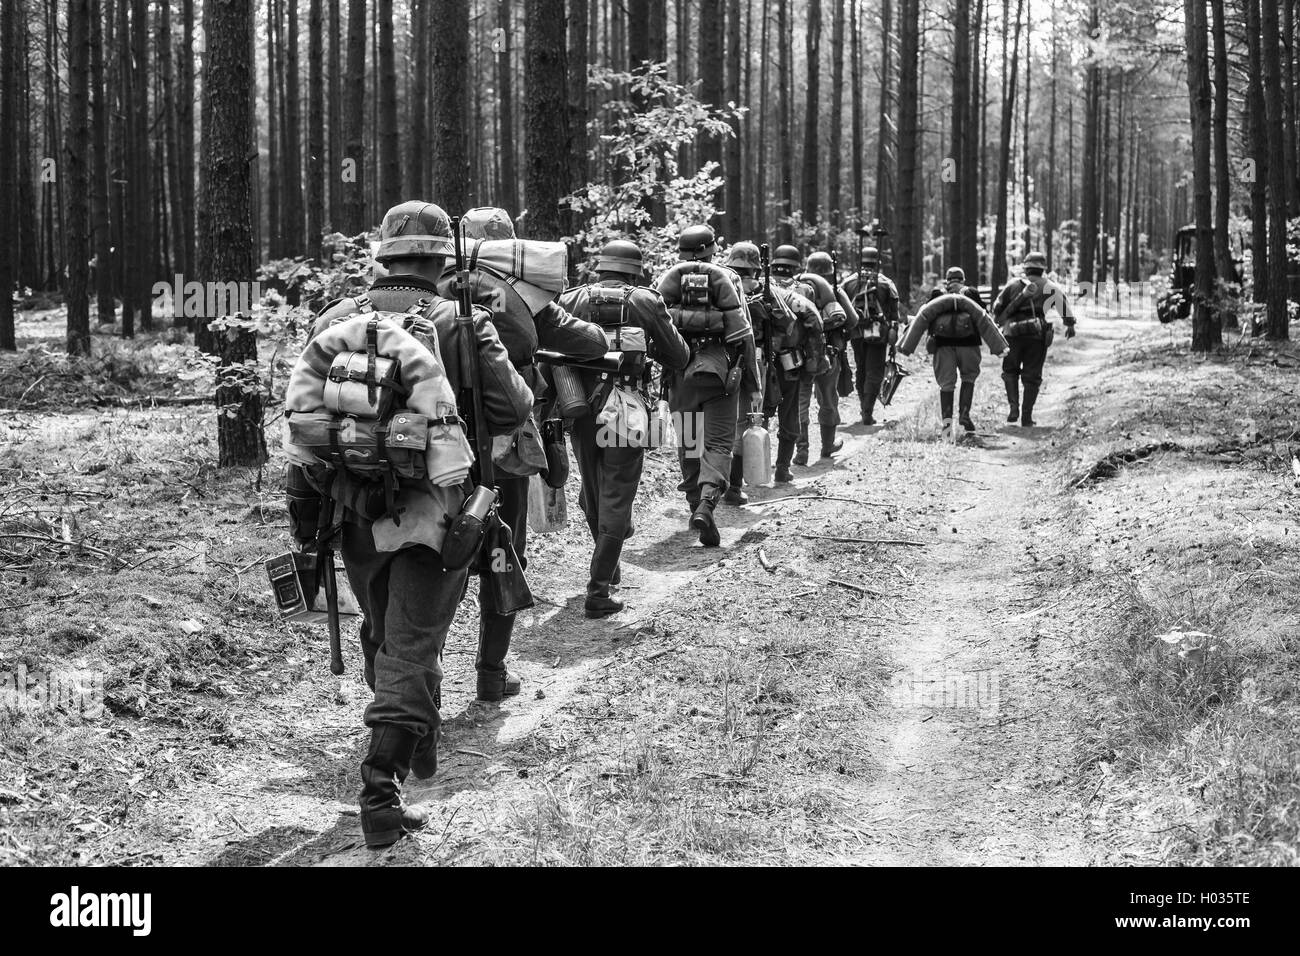 Unidentified Re-enactors Dressed As World War II German Soldiers Walks On Forest Road. Black And White Photography Stock Photo